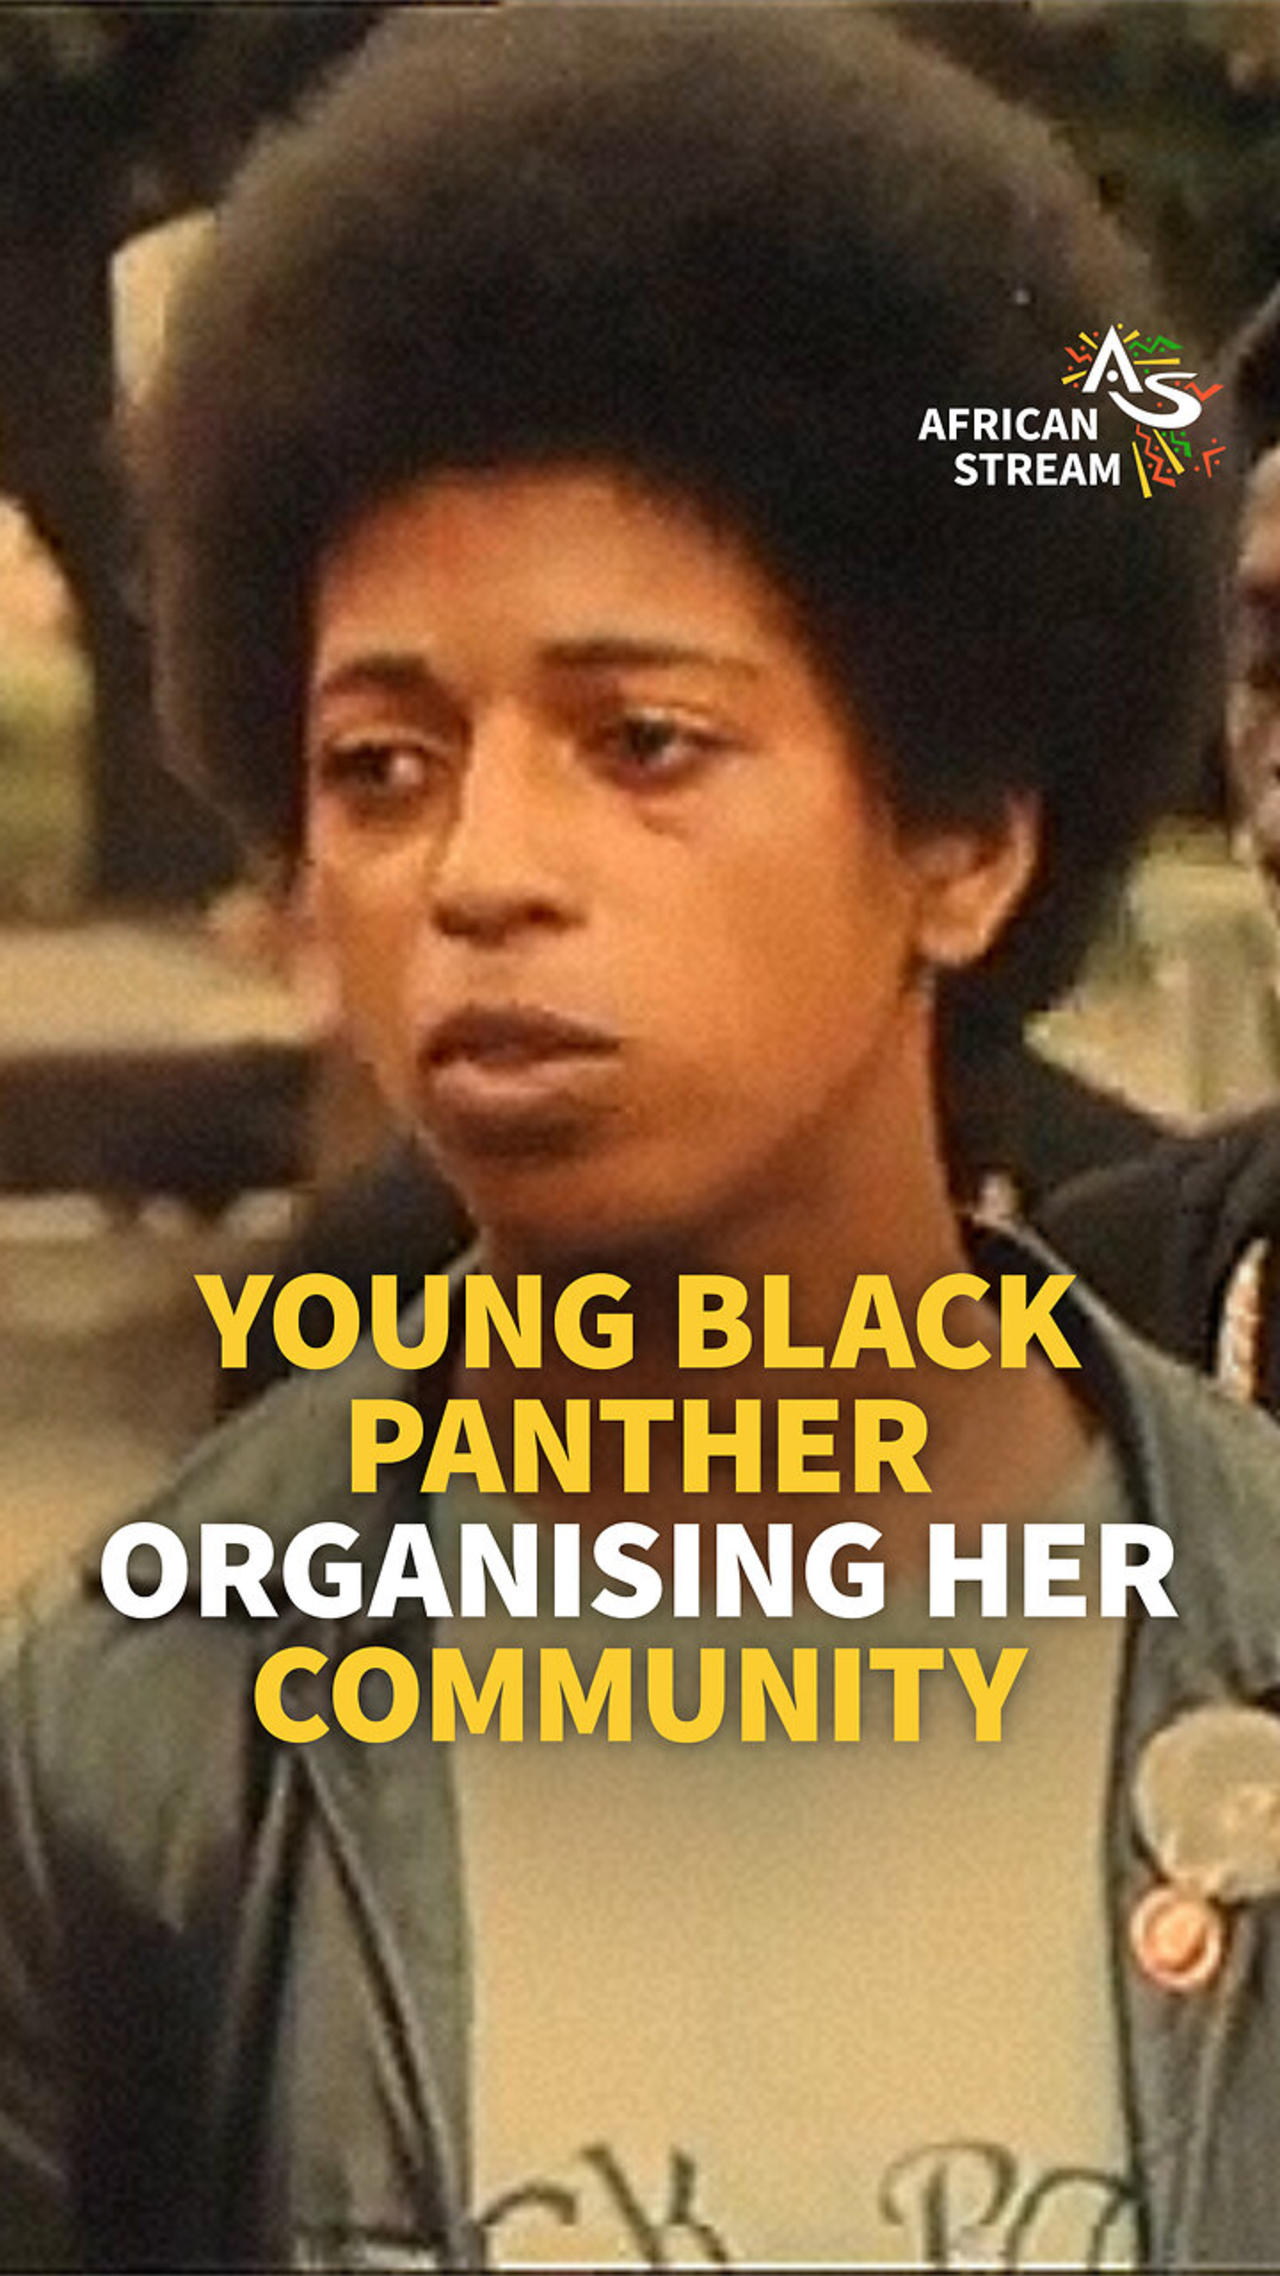 YOUNG BLACK PANTHER ORGANISING HER COMMUNITY